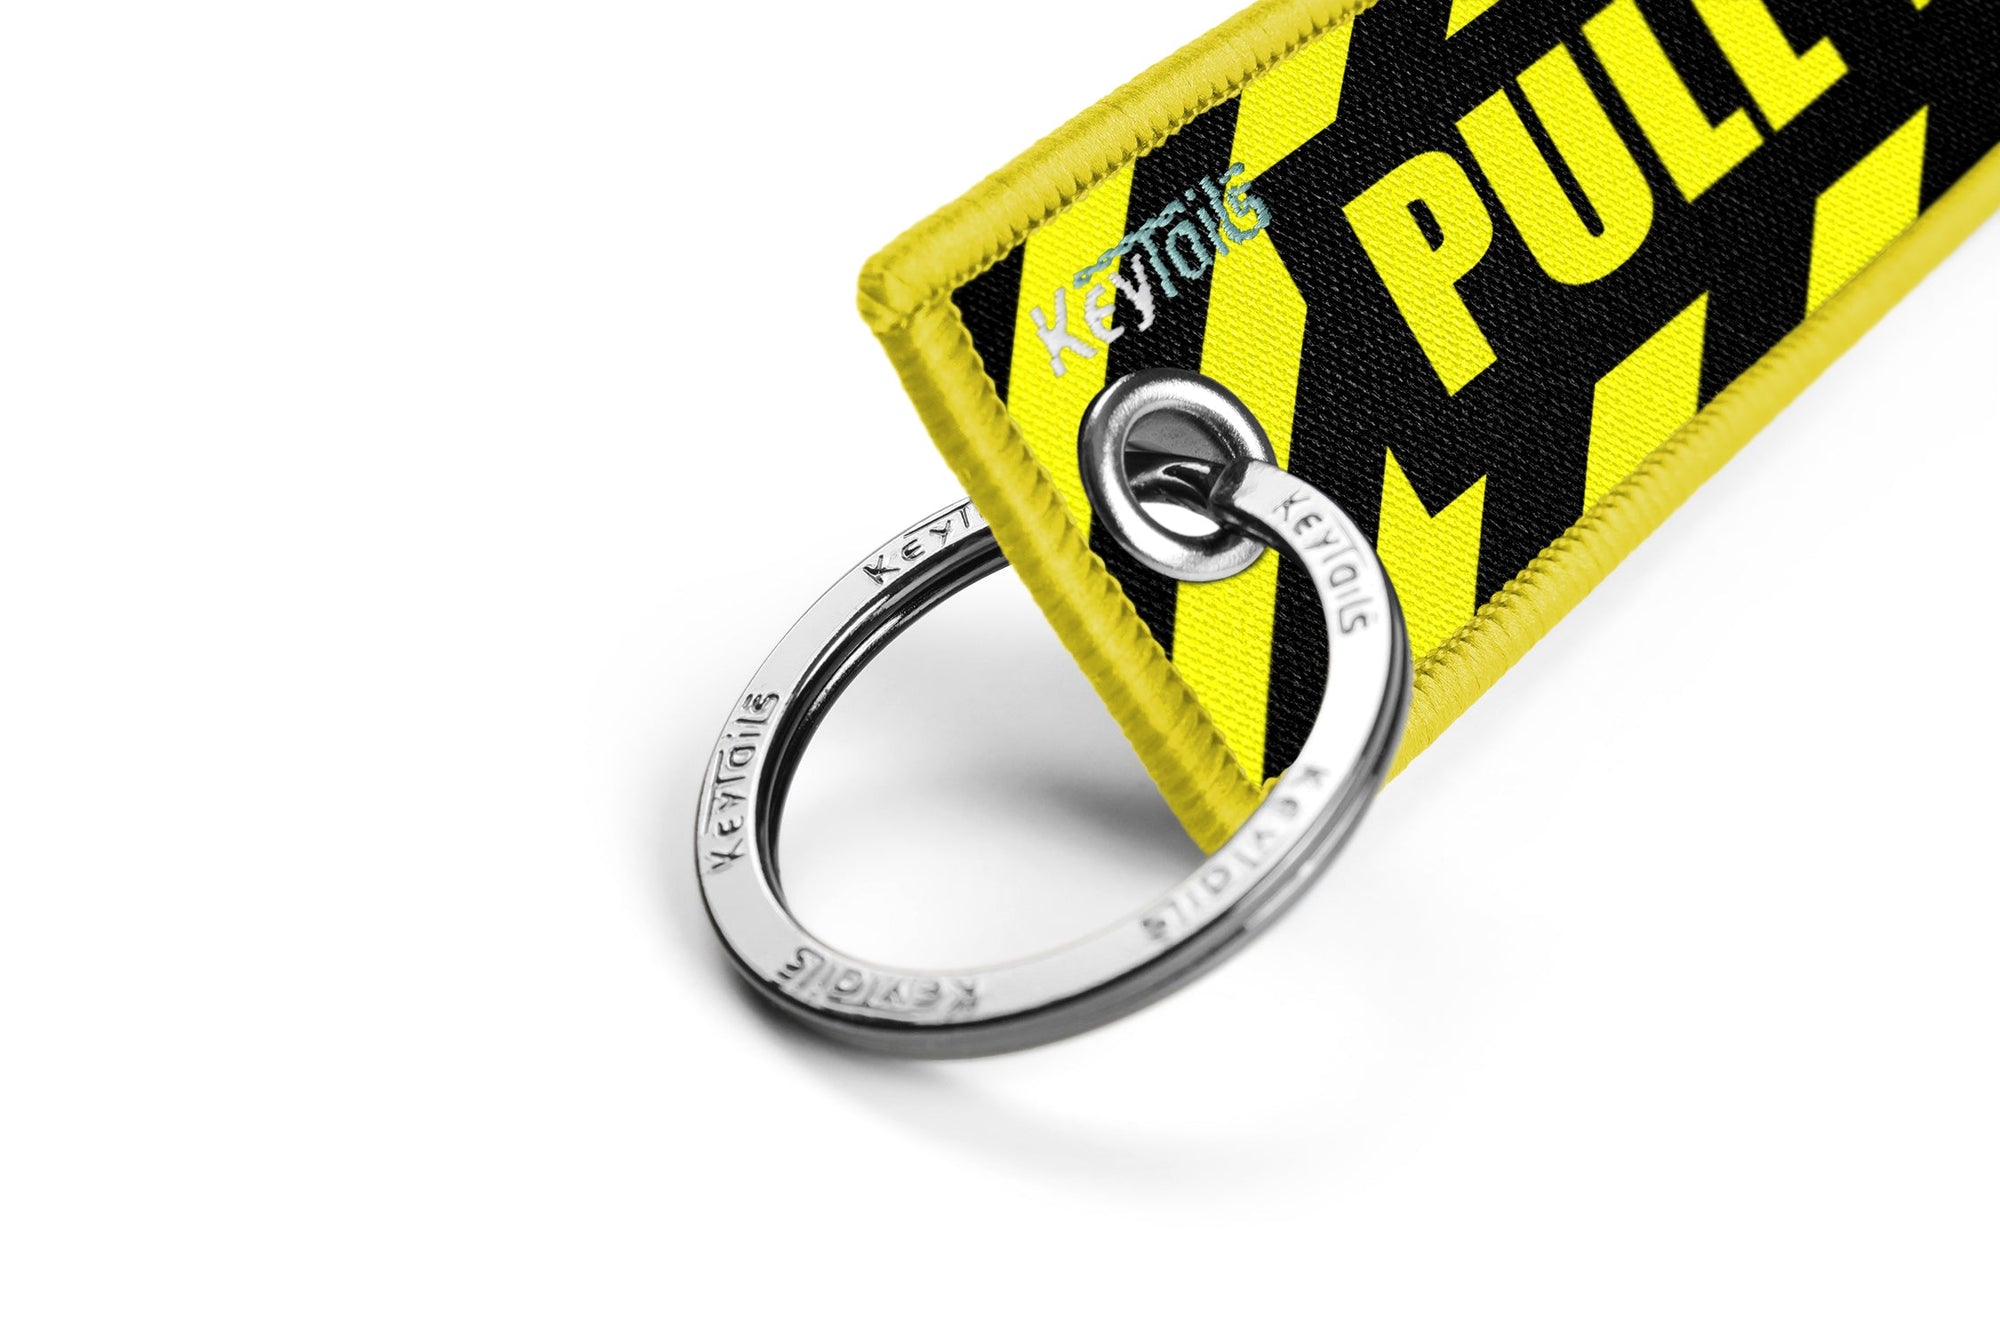 Pull To Eject Keychain, Key Tag - Yellow